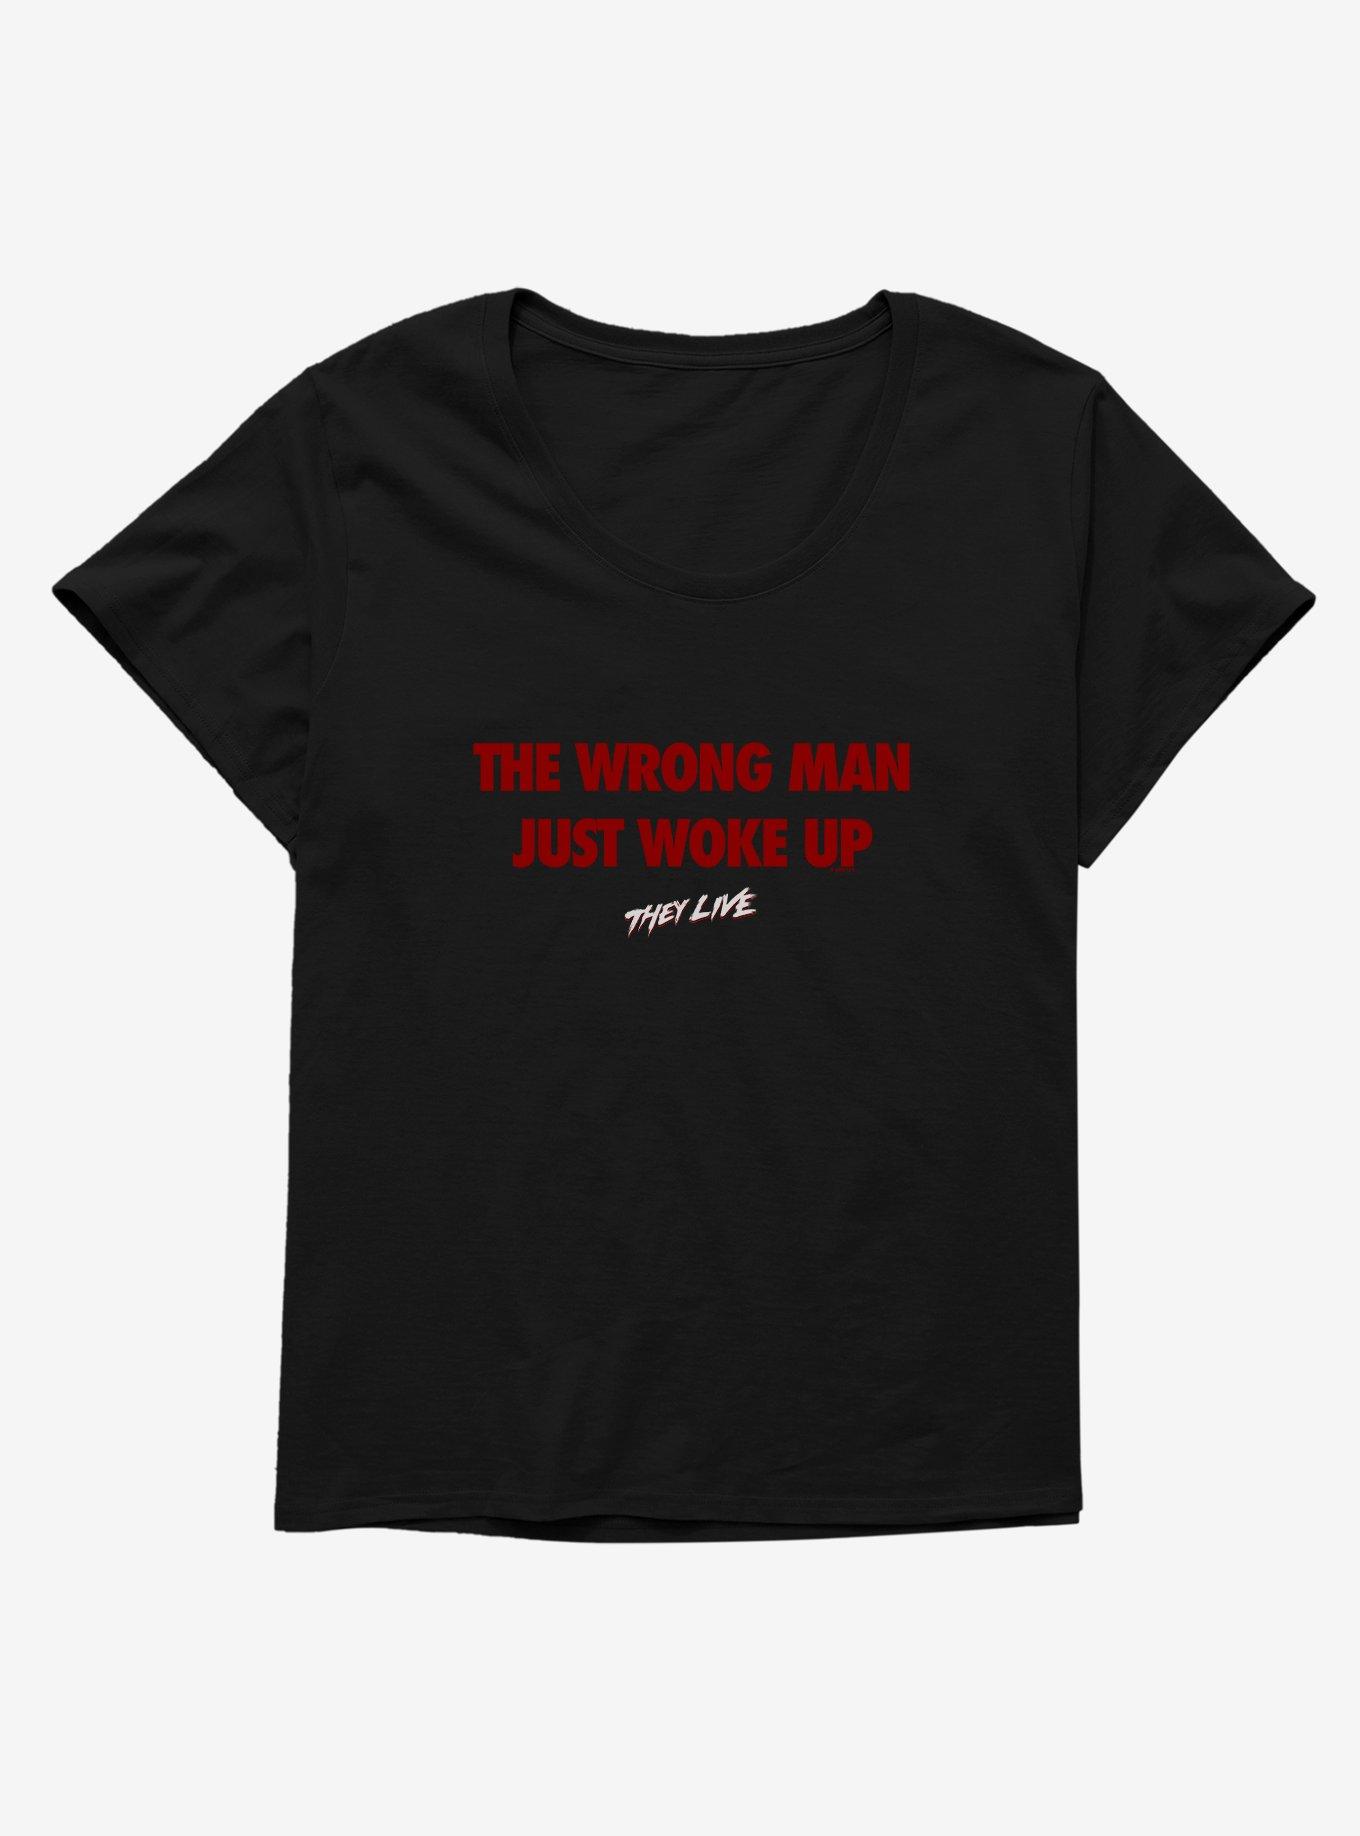 They Live The Wrong Man Just Woke Up Girls T-Shirt Plus Size, BLACK, hi-res